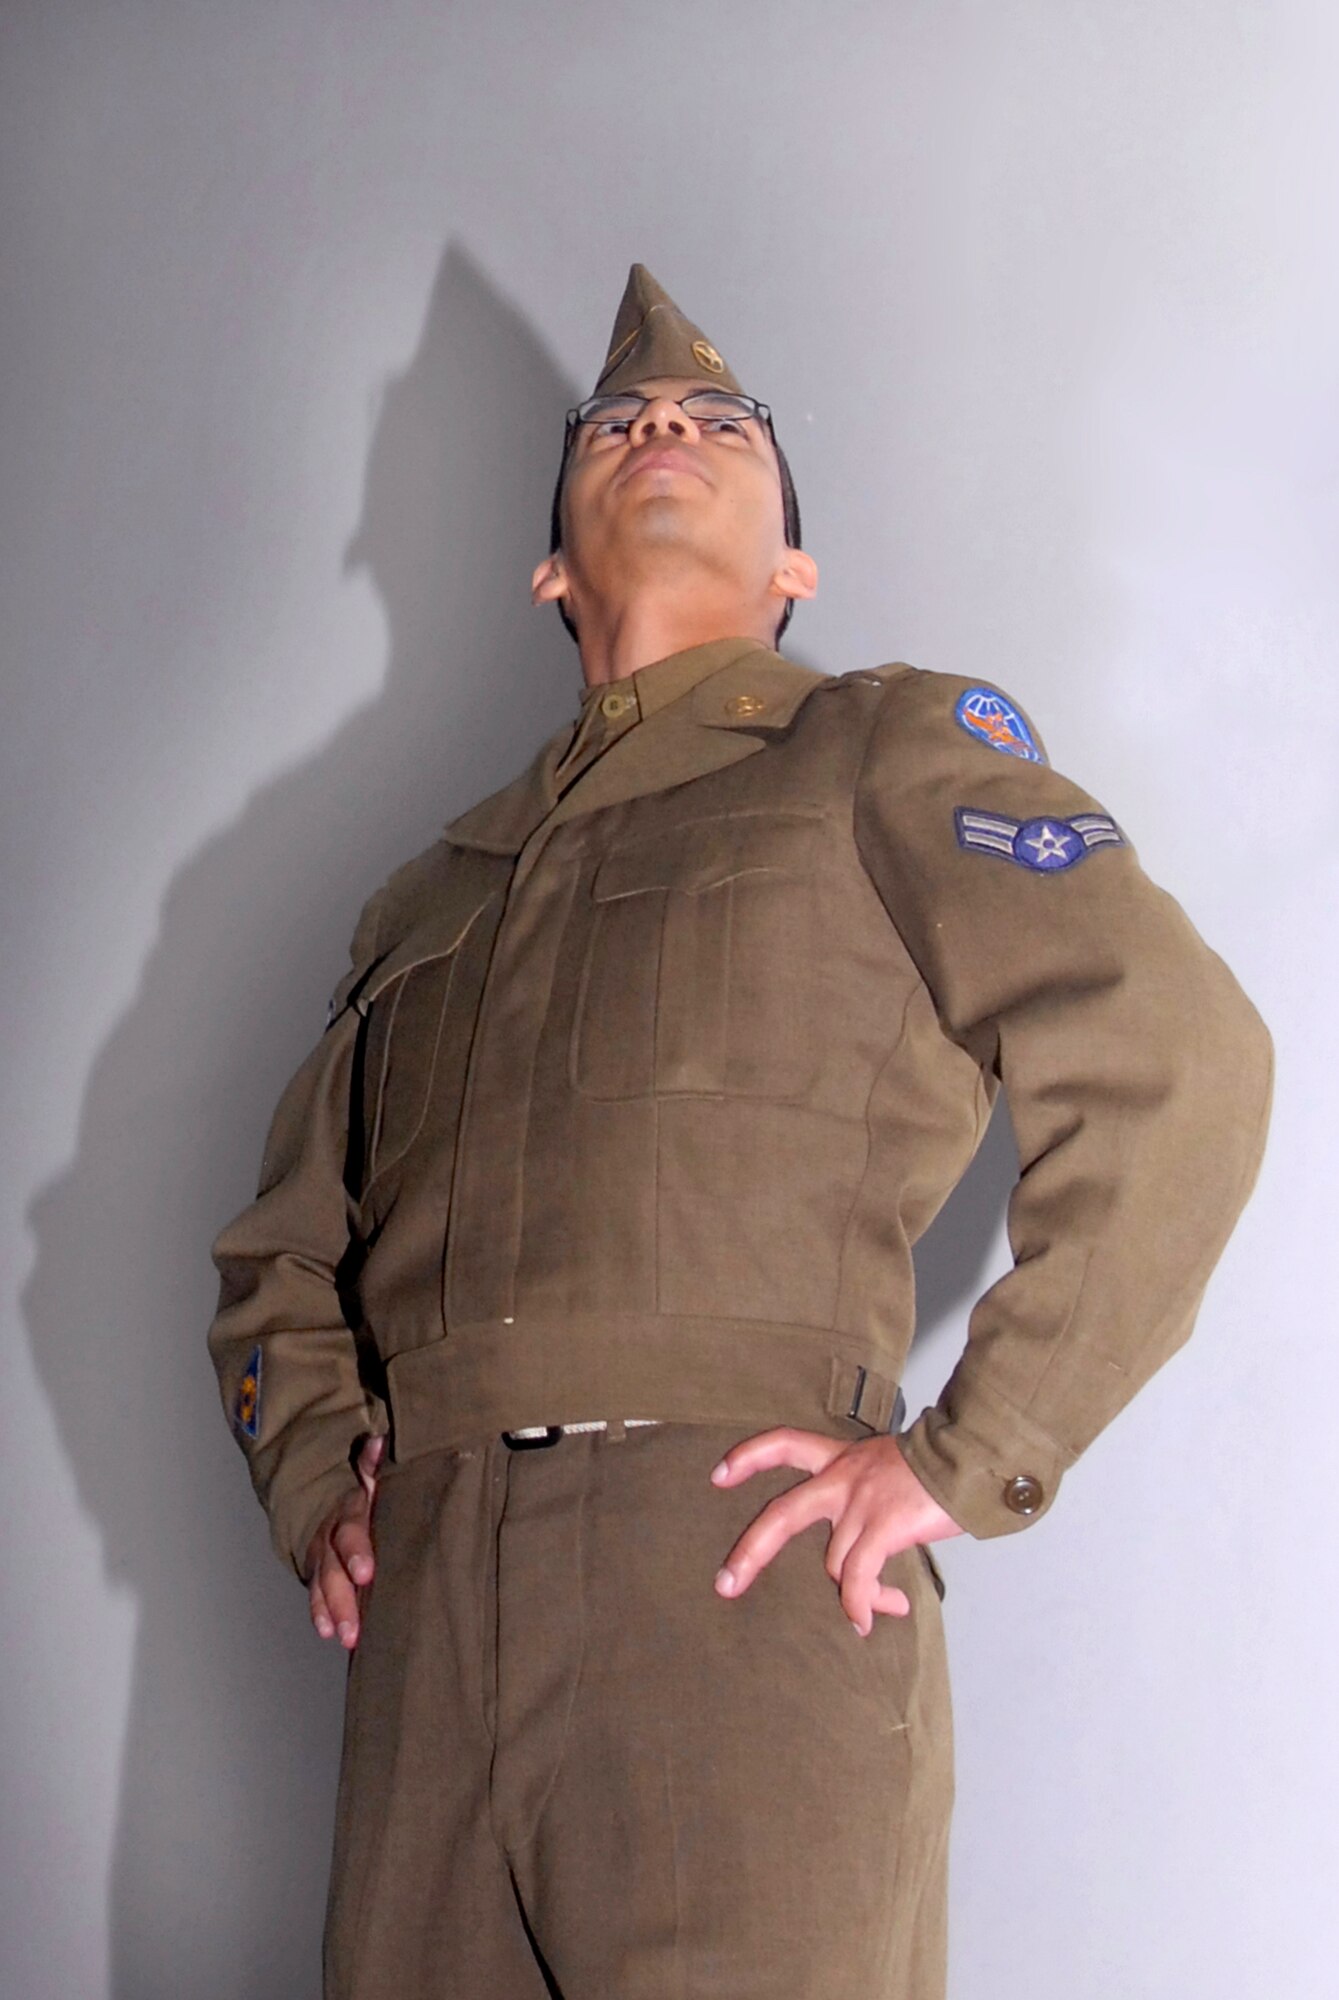 Senior Airman Eliezer Cruz-Flacon, 379th Expeditionary Communications Squadron, models the World War II Army Air Corps transitional uniform with Air Force accouterments during Operation Uniform Delta, April 27, 2009, at an undisclosed base in Southwest Asia.  Operation Uniform Delta was an event displaying the history and birth of the Air Force uniform and showed the transitions that it underwent through the years.  Airman Cruz-Falcon hails from Orlando, Fla. and is deployed from Ramstein Air Base, Germany in support of Operations Iraqi and Enduring Freedom and Combined Joint Task Force - Horn of Africa. (U.S. Air Force photo/Senior Airman Andrew Satran/released)